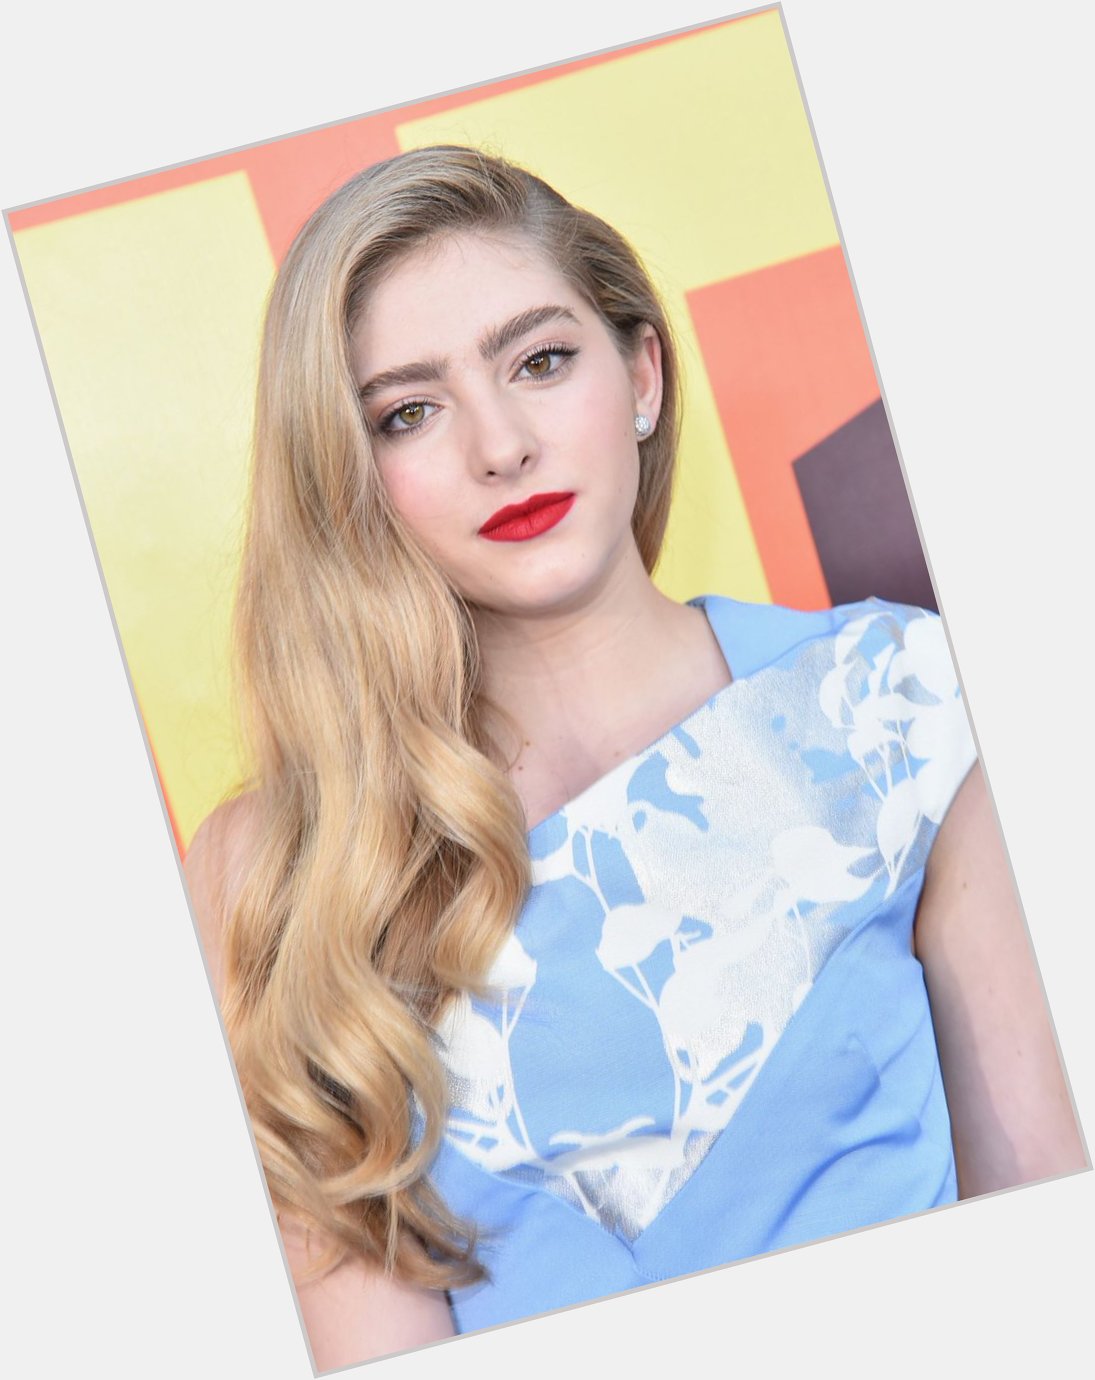 Happy 21st Birthday Shout Out to the lovely Willow Shields!! 